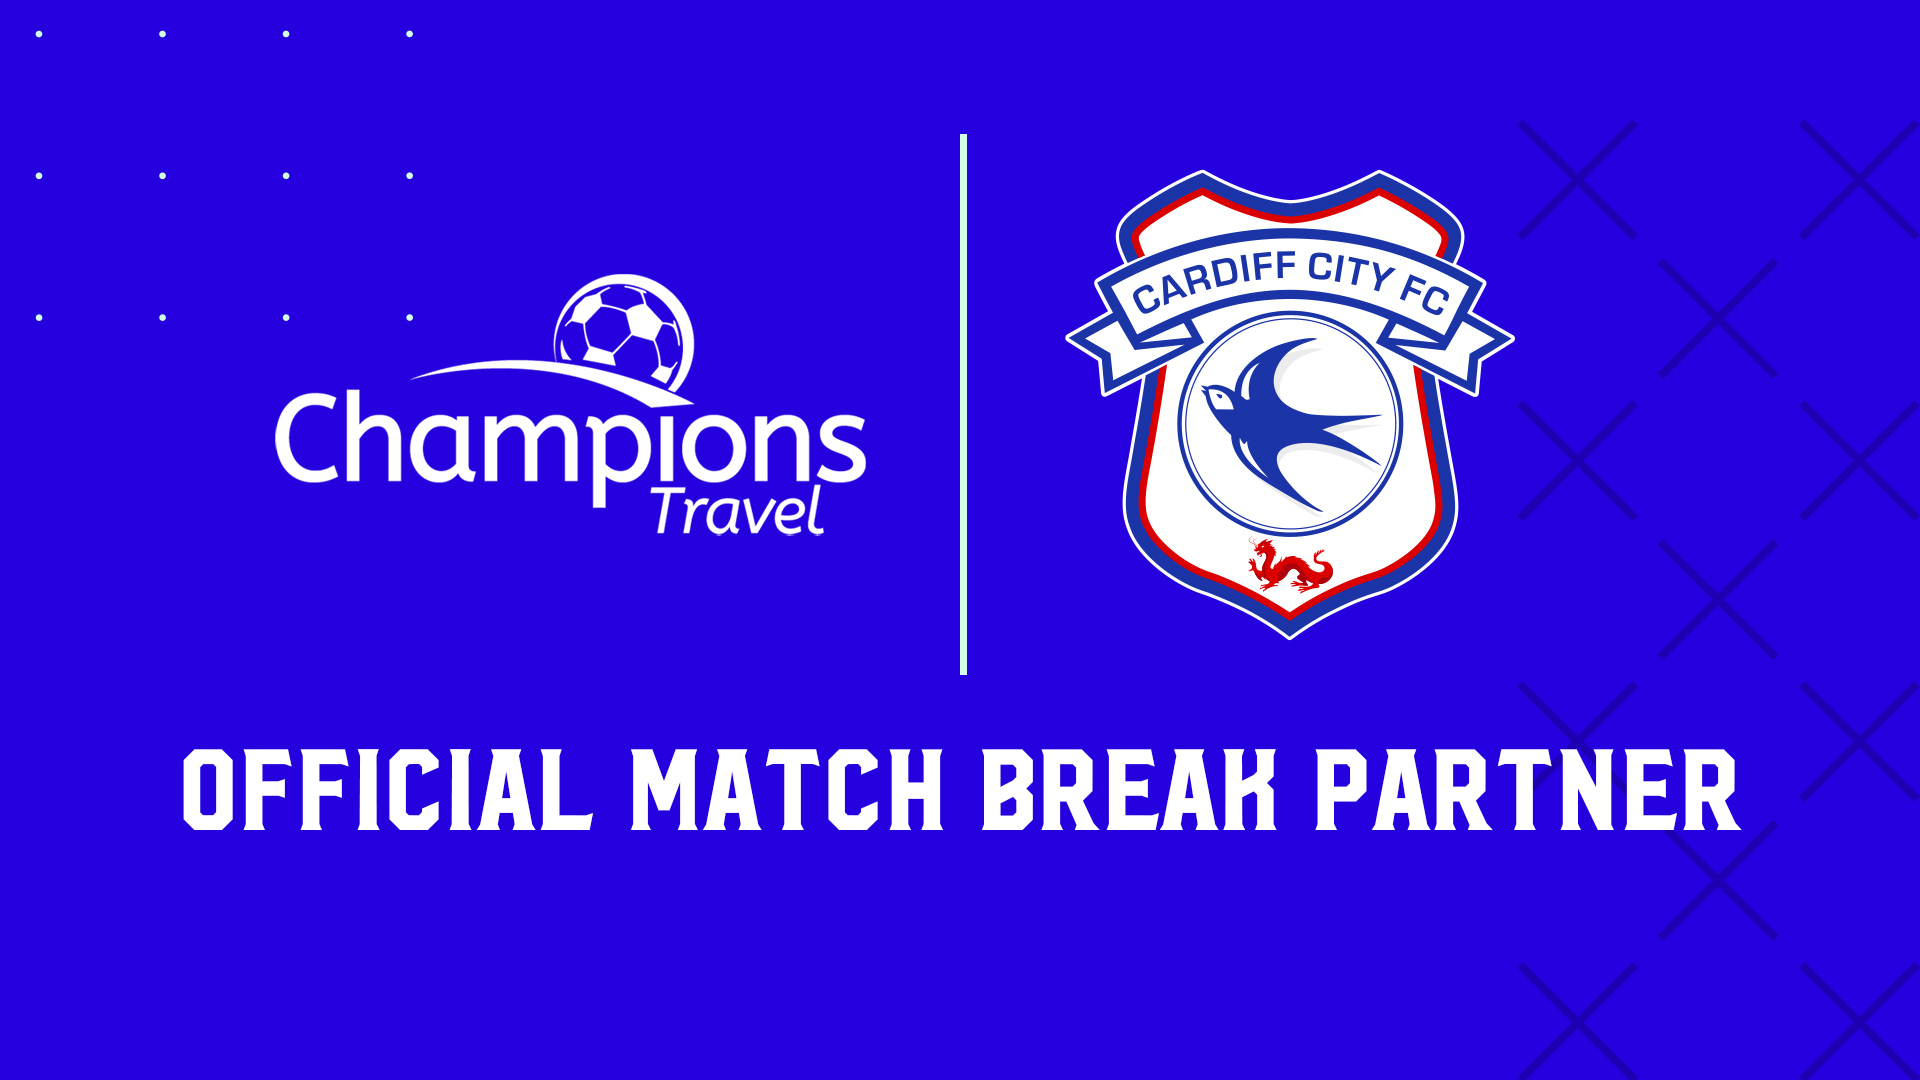 Champions Travel have linked up with the Bluebirds...